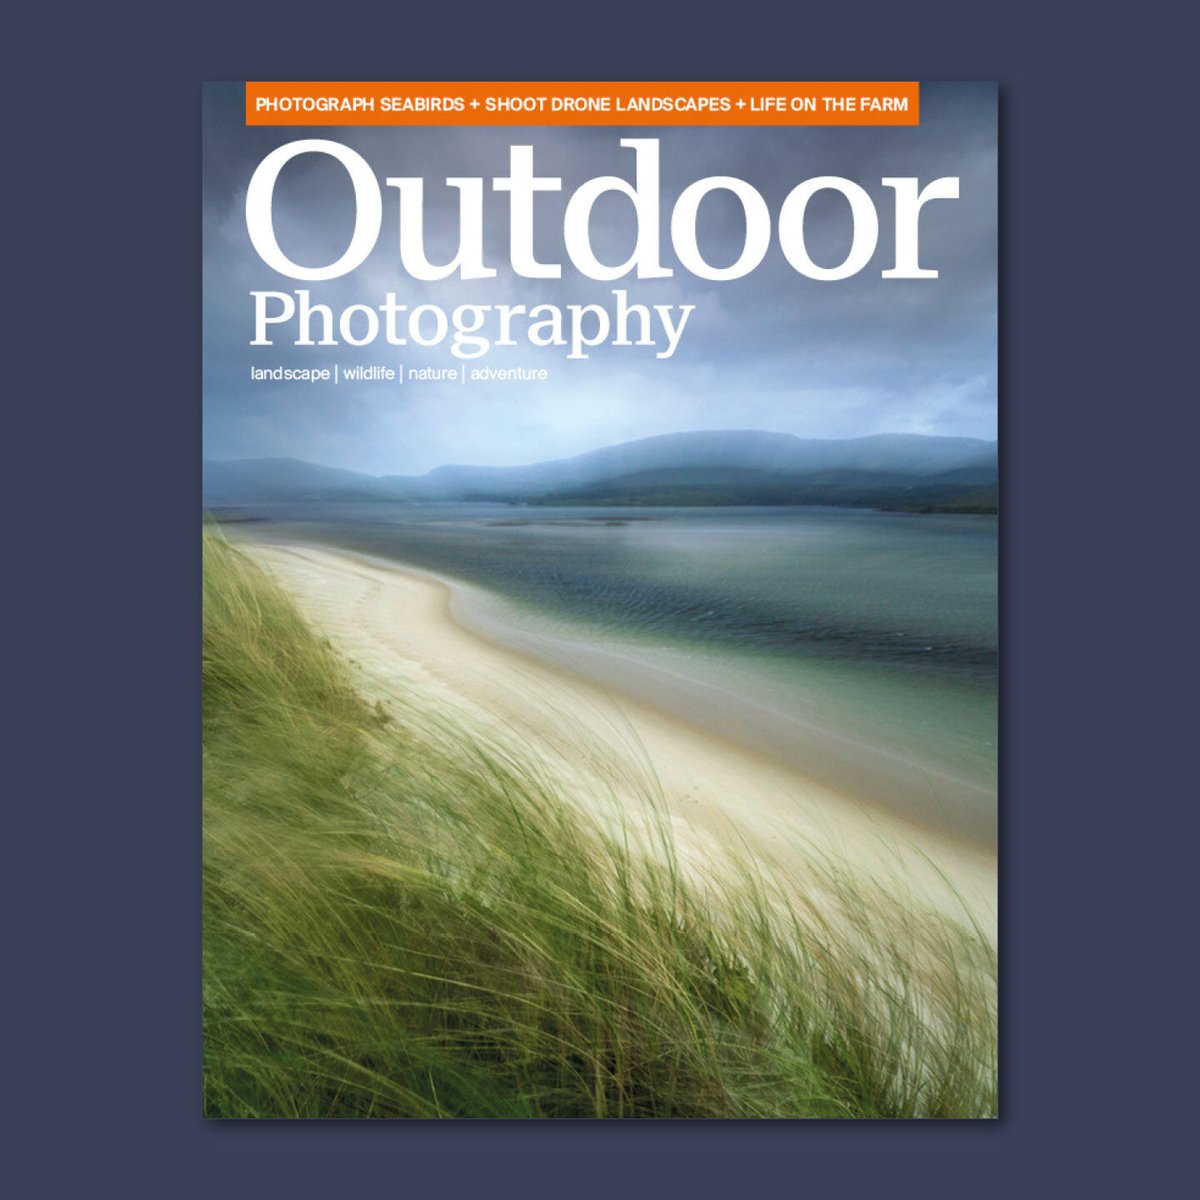 OP 306 is now on sale! Highlights include: Adam Burton’s guide to getting started with drones; @drewbphoto's tips for photographing seabirds; @croftfoot on her Forty Farms project; and Harry Skeggs’ stunning new book. See more at bit.ly/3rxc2qY Cover © Richard Watson